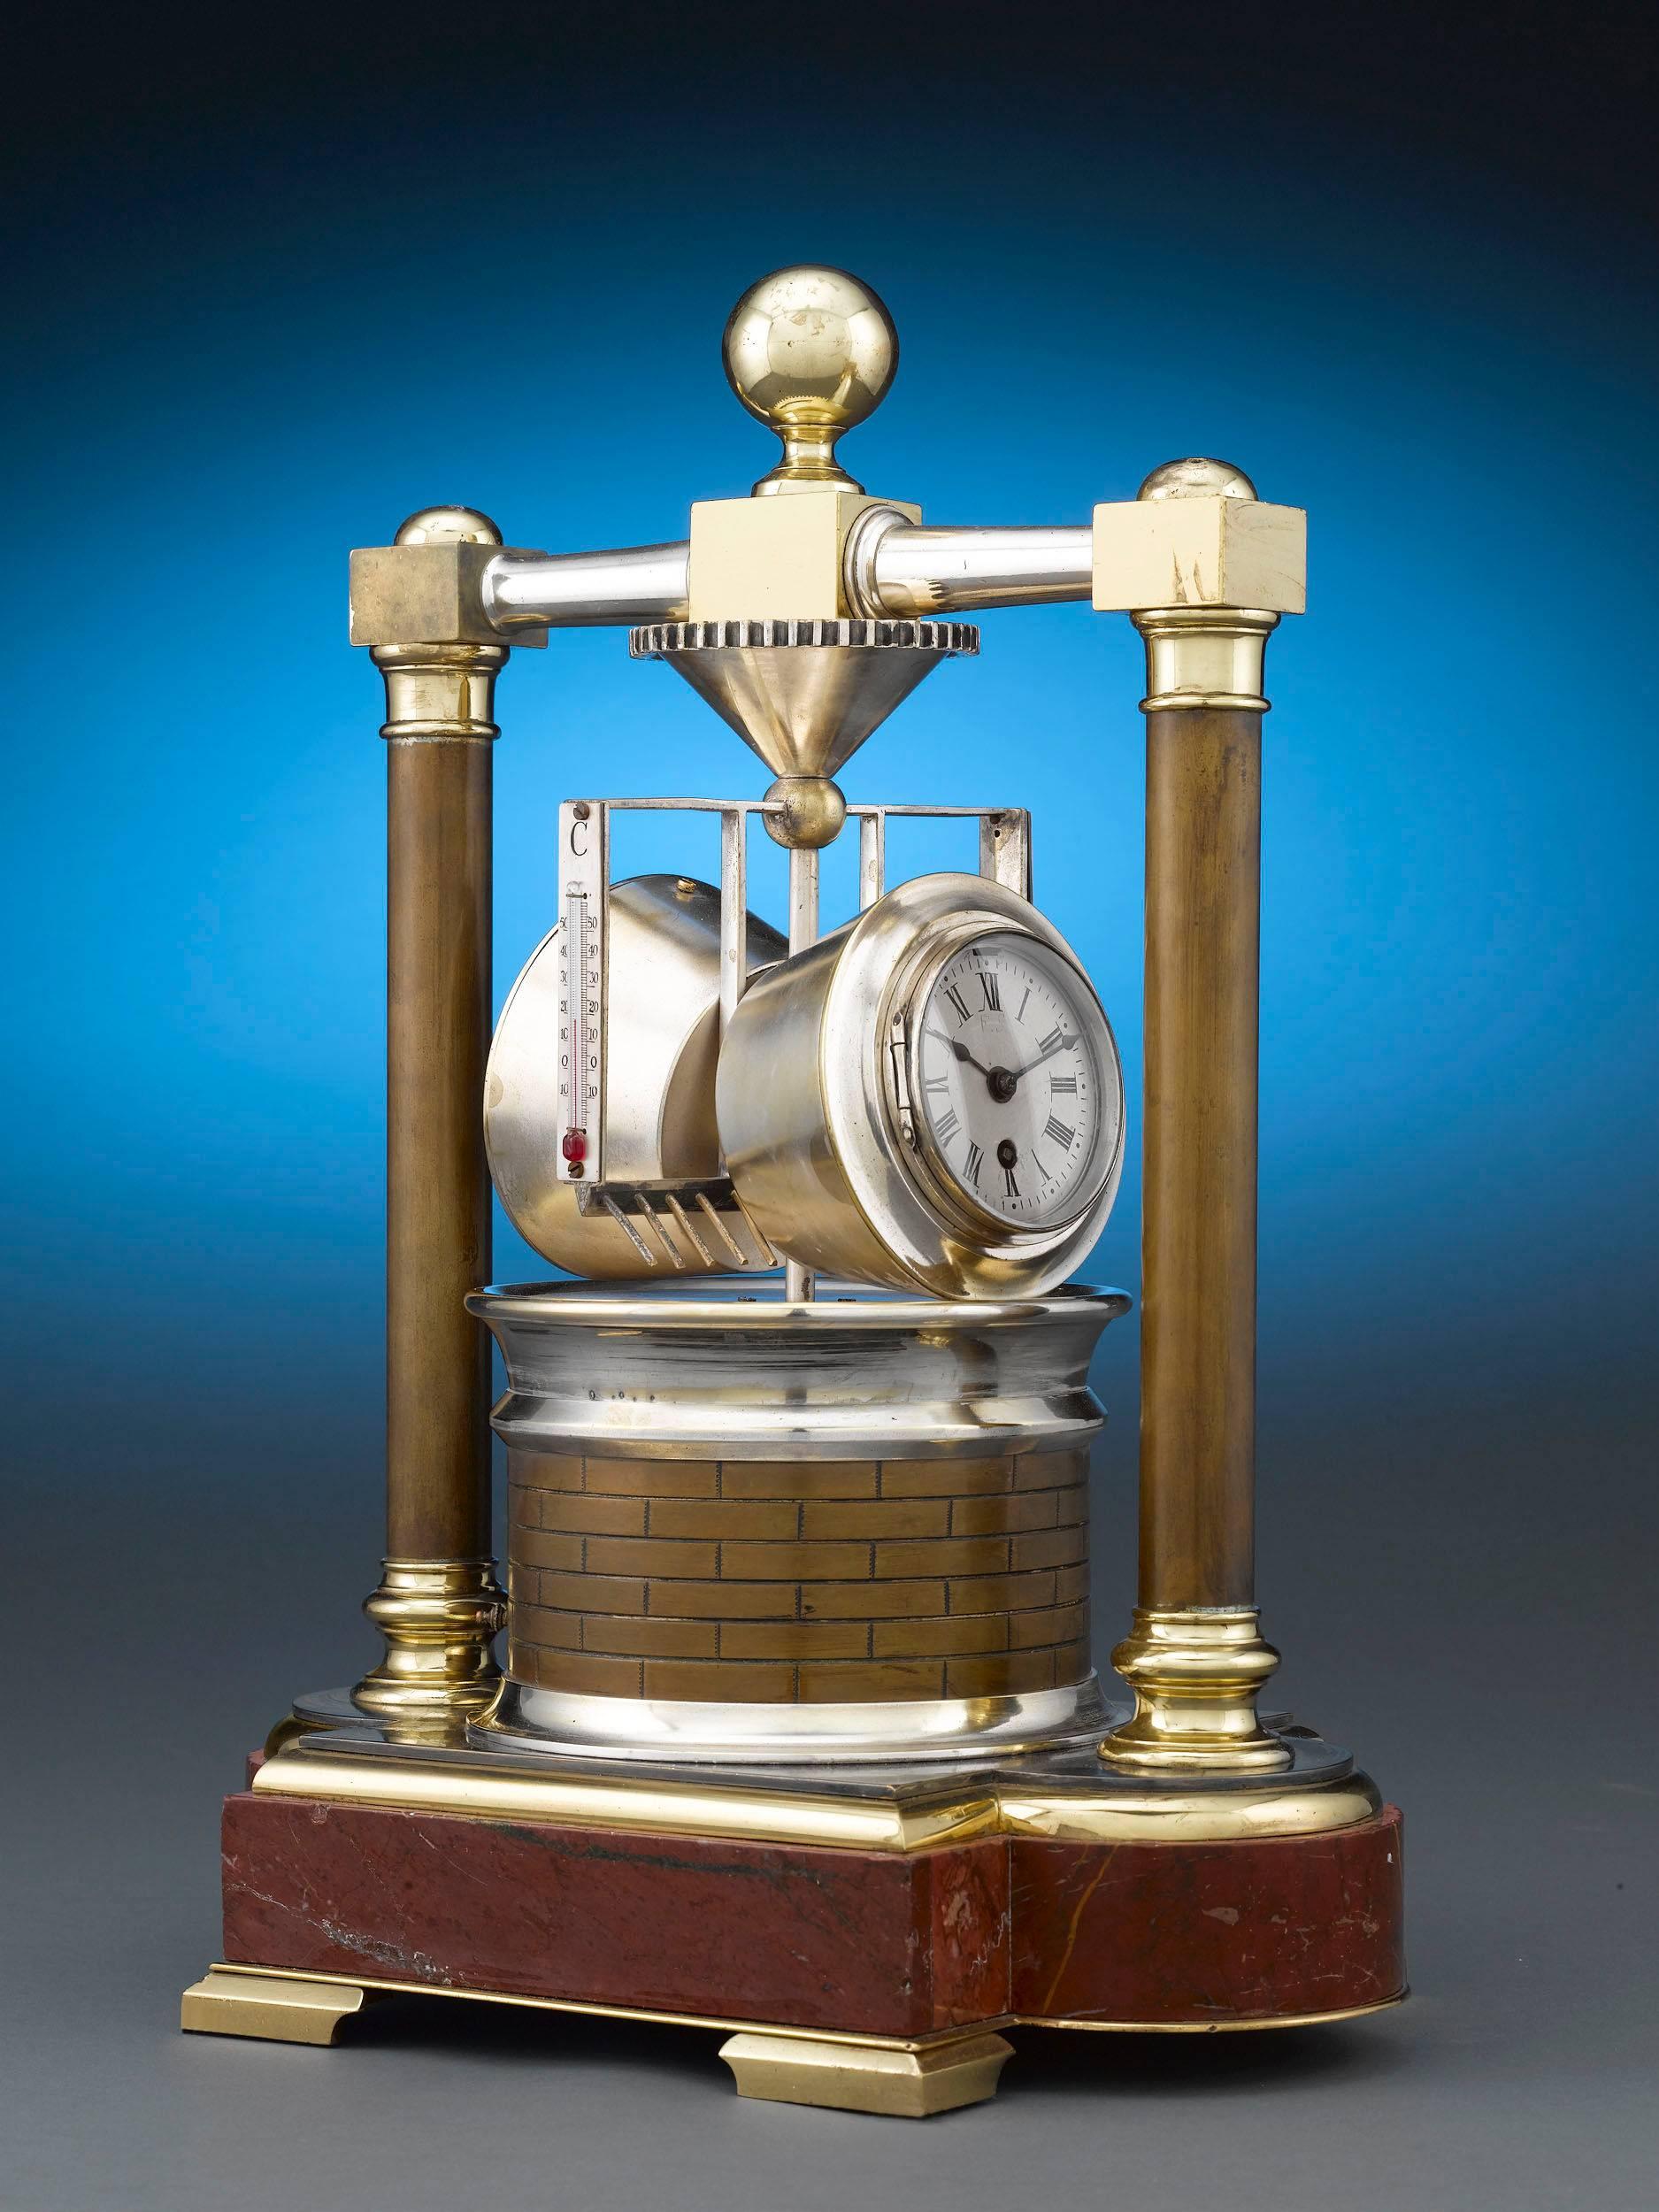 This stunning Industrial clock is crafted in the form of a horizontal grist mill. Crafted of silvered and gilt bronze, this intriguing instrument combines a spring-wound, silvered dial clock and aneroid barometer within its dual-barreled design, as